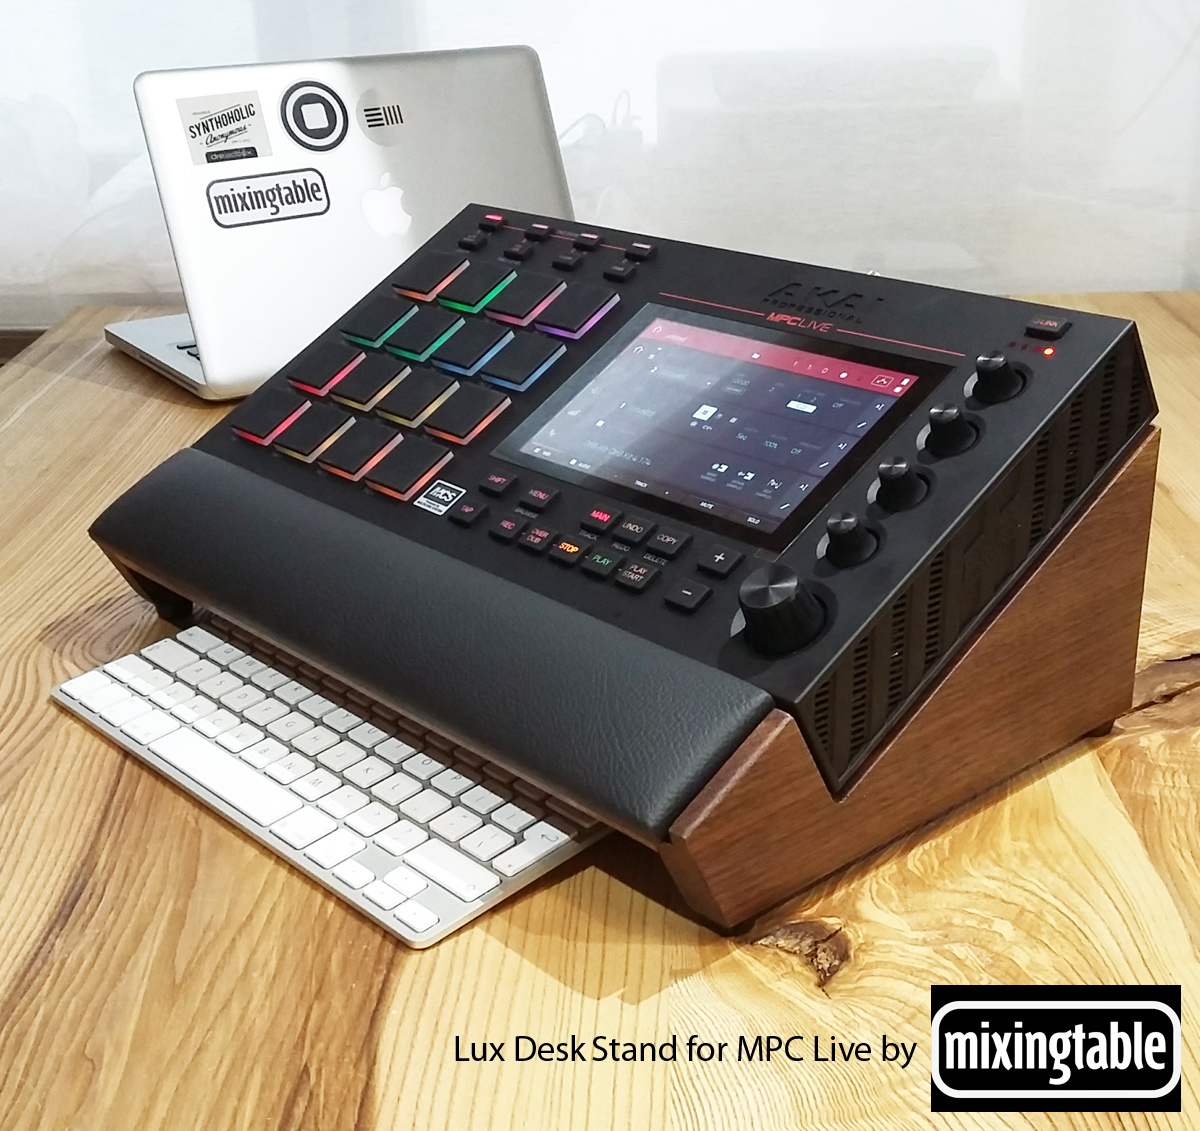 Lux-Desk-Stand-For-MPC-Live-by-mixingtable.jpg